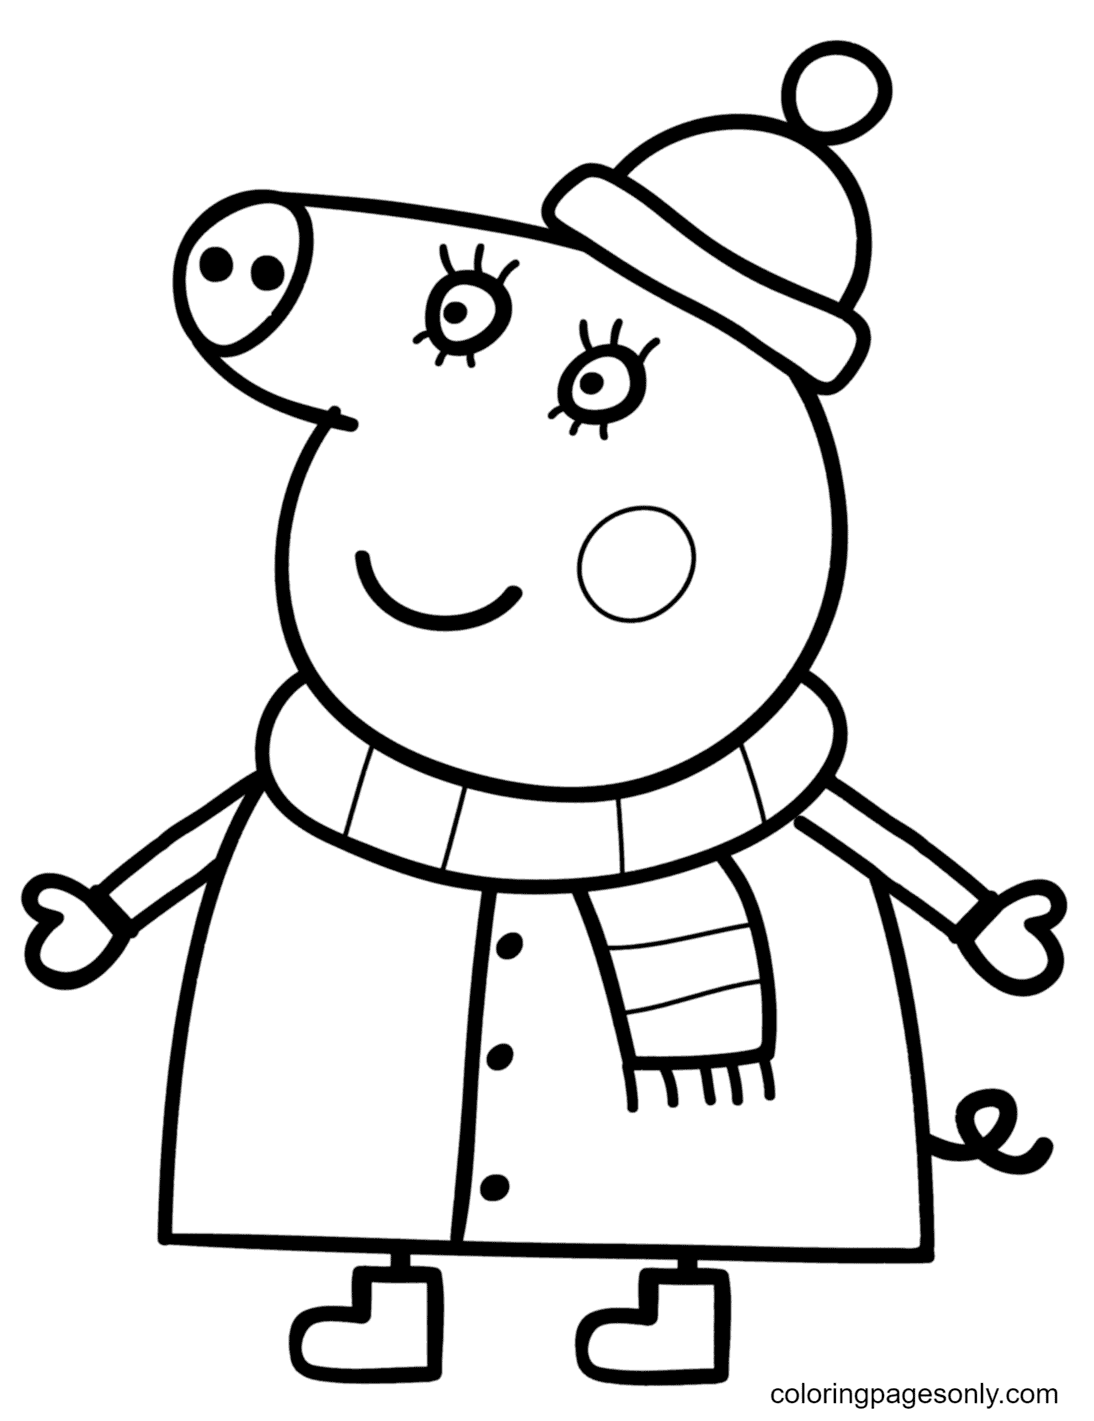 Mummy Pig in Winter Suit Coloring Pages - Peppa Pig Coloring Pages - Coloring  Pages For Kids And Adults